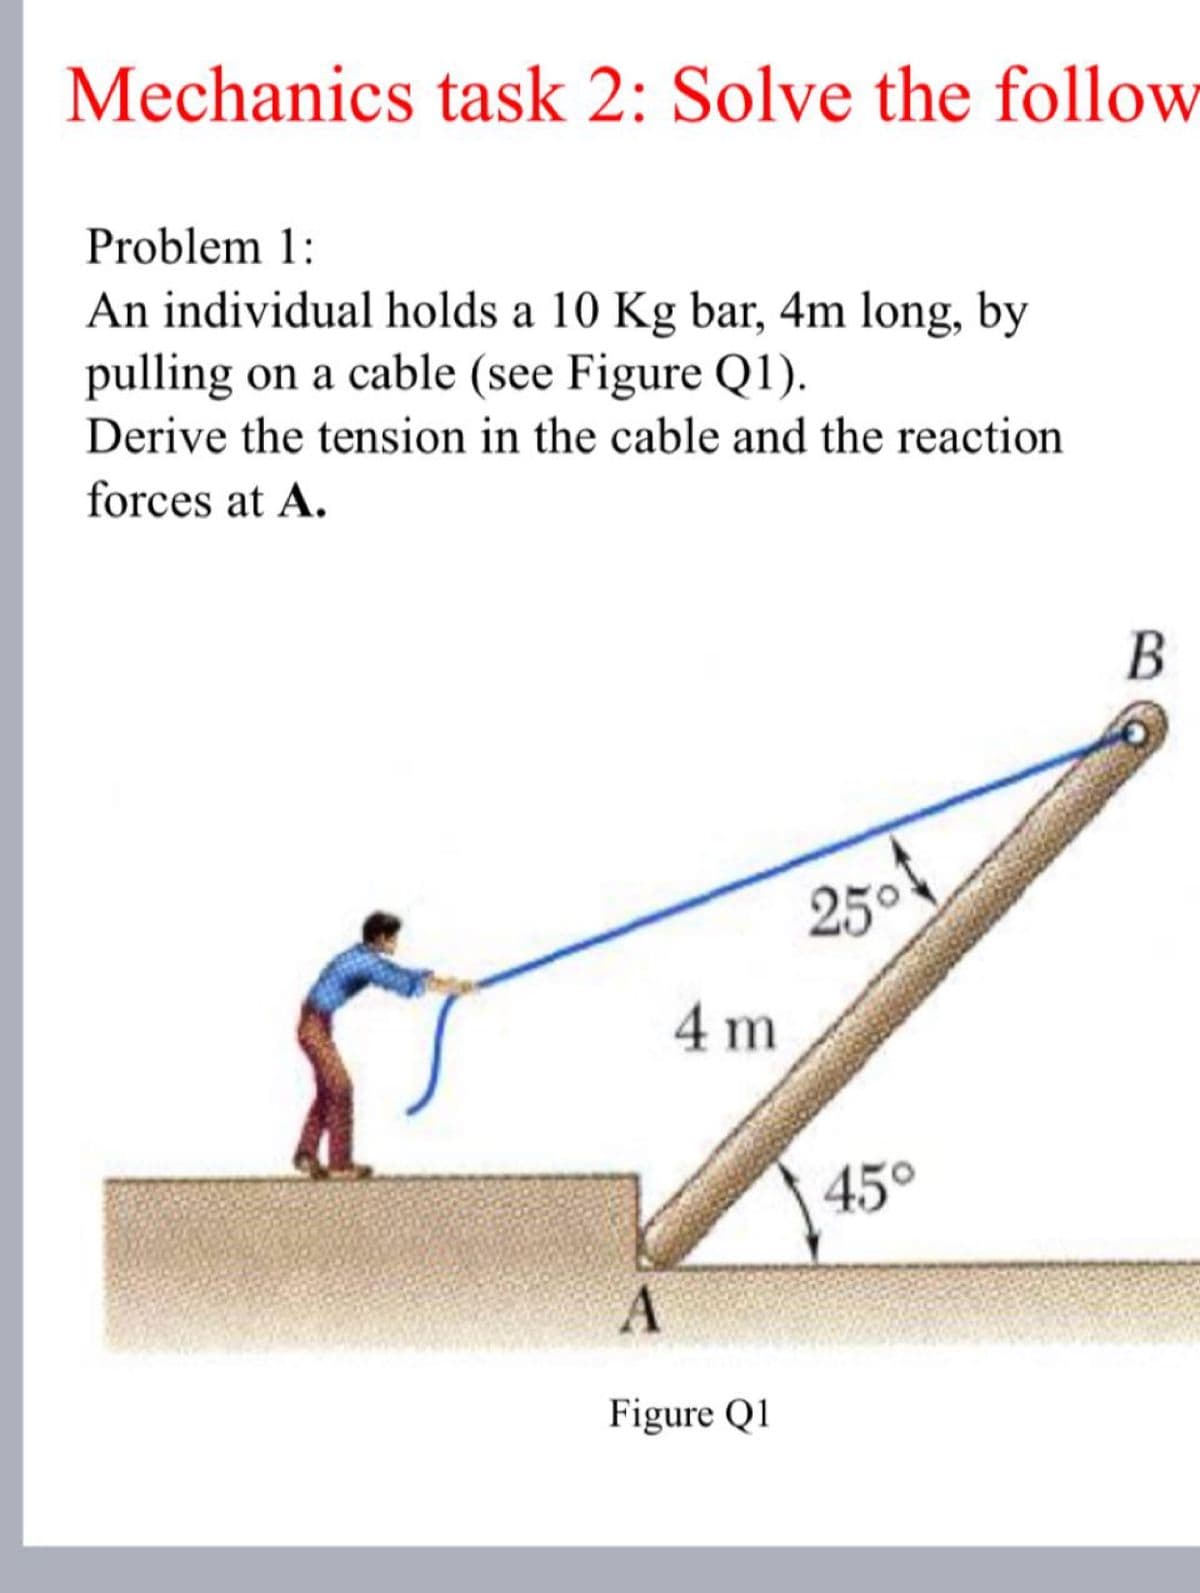 Mechanics task 2: Solve the follow
Problem 1:
An individual holds a 10 Kg bar, 4m long, by
pulling on a cable (see Figure Q1).
Derive the tension in the cable and the reaction
forces at A.
A
4 m
Figure Q1
25°
45°
B